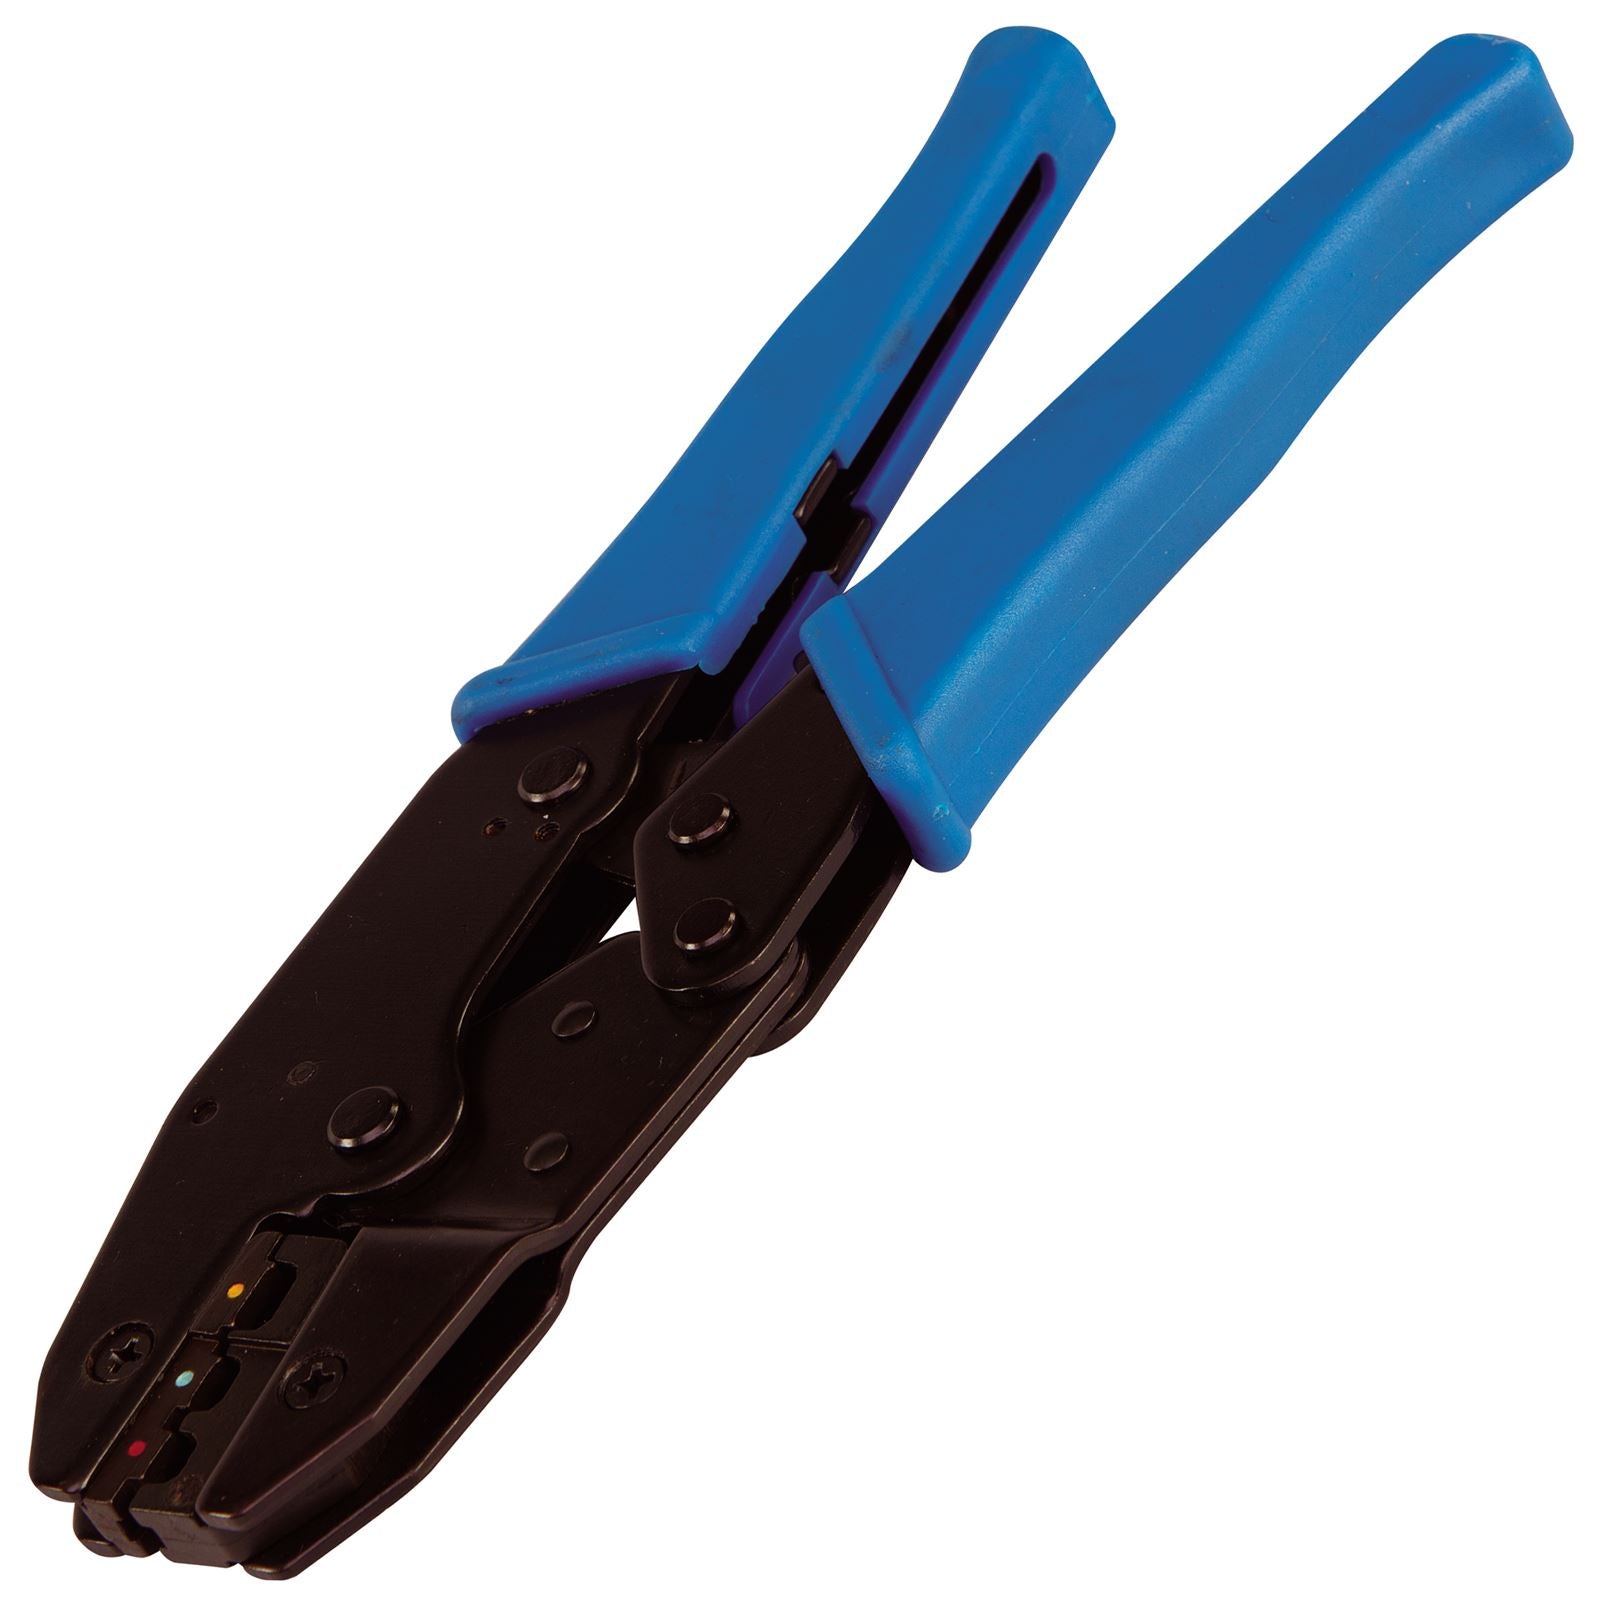 Silverline Ratchet Crimping Pliers Insulated Terminals Crimpers Heavy Duty